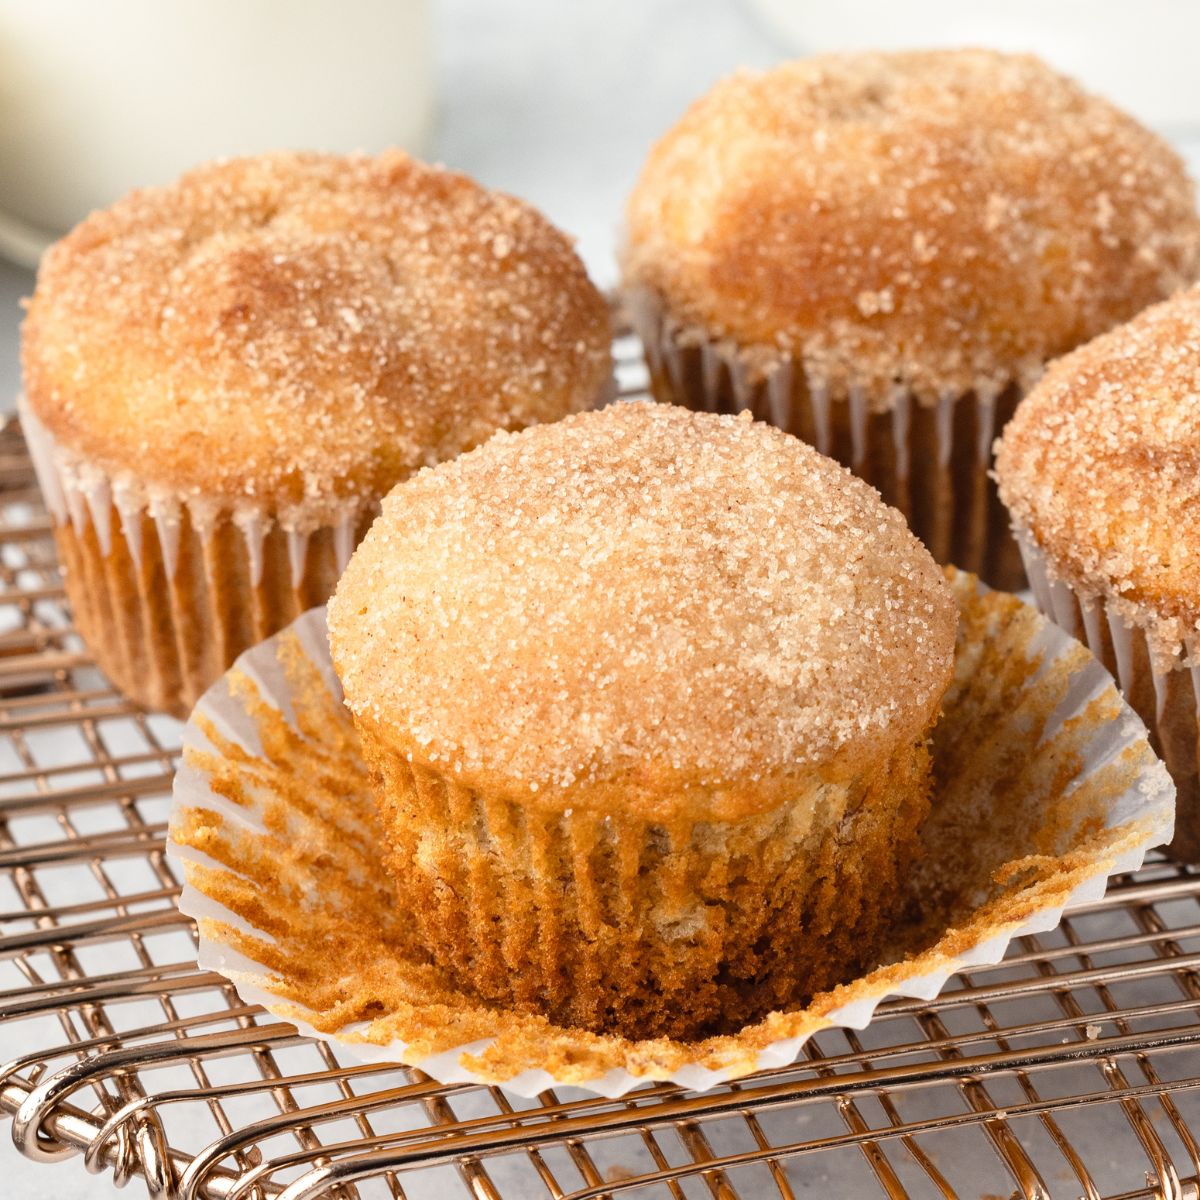 https://togetherasfamily.com/wp-content/uploads/2020/01/banana-bread-muffins-square-2.jpg